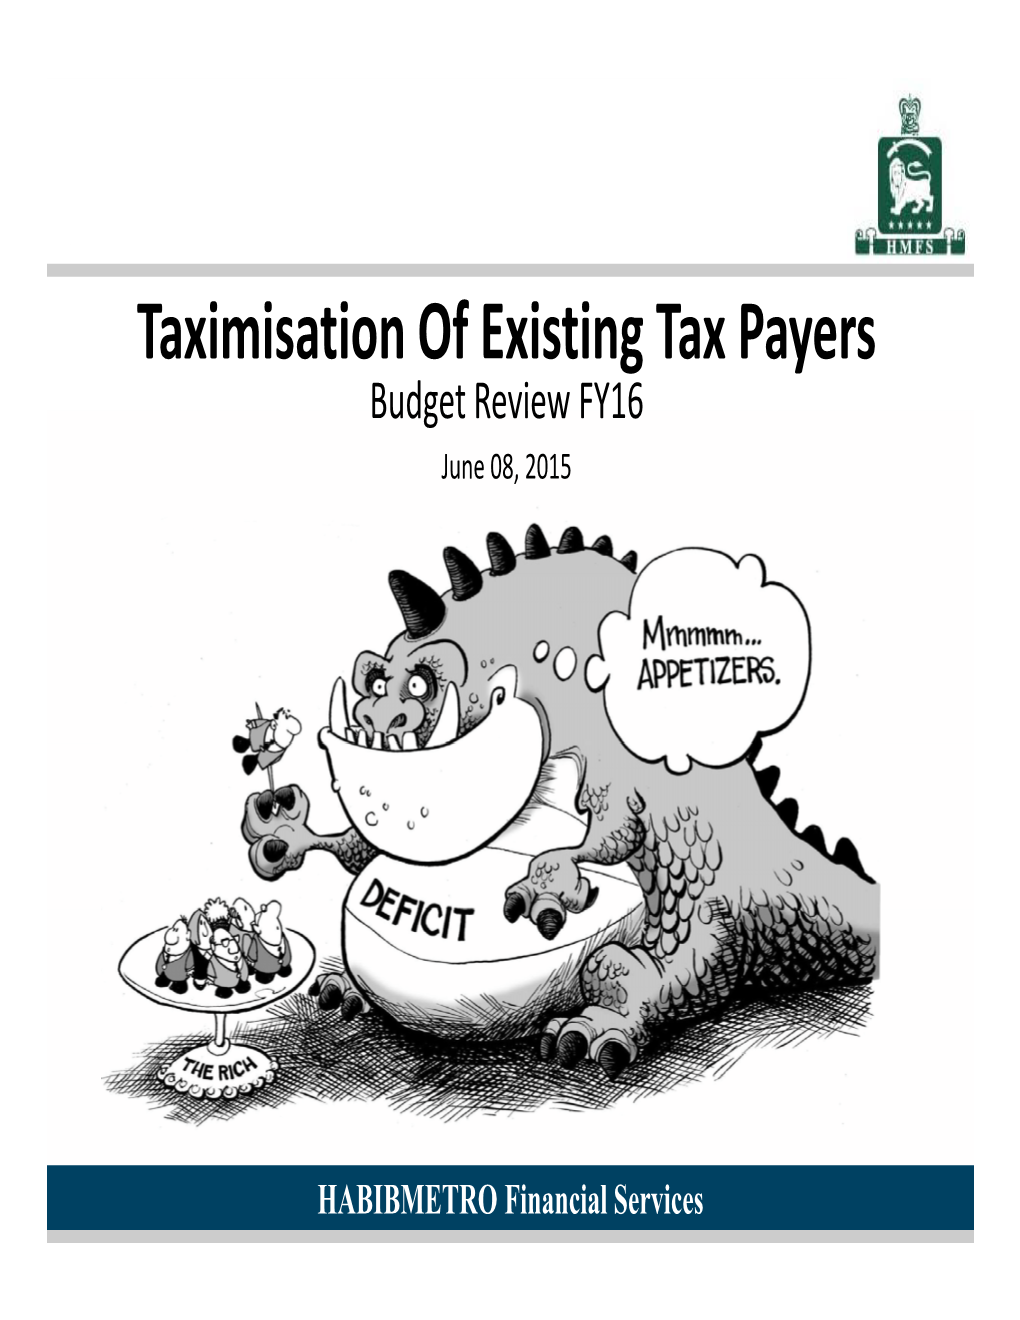 Taximisation of Existing Tax Payers Budget Review FY16 June 08, 2015